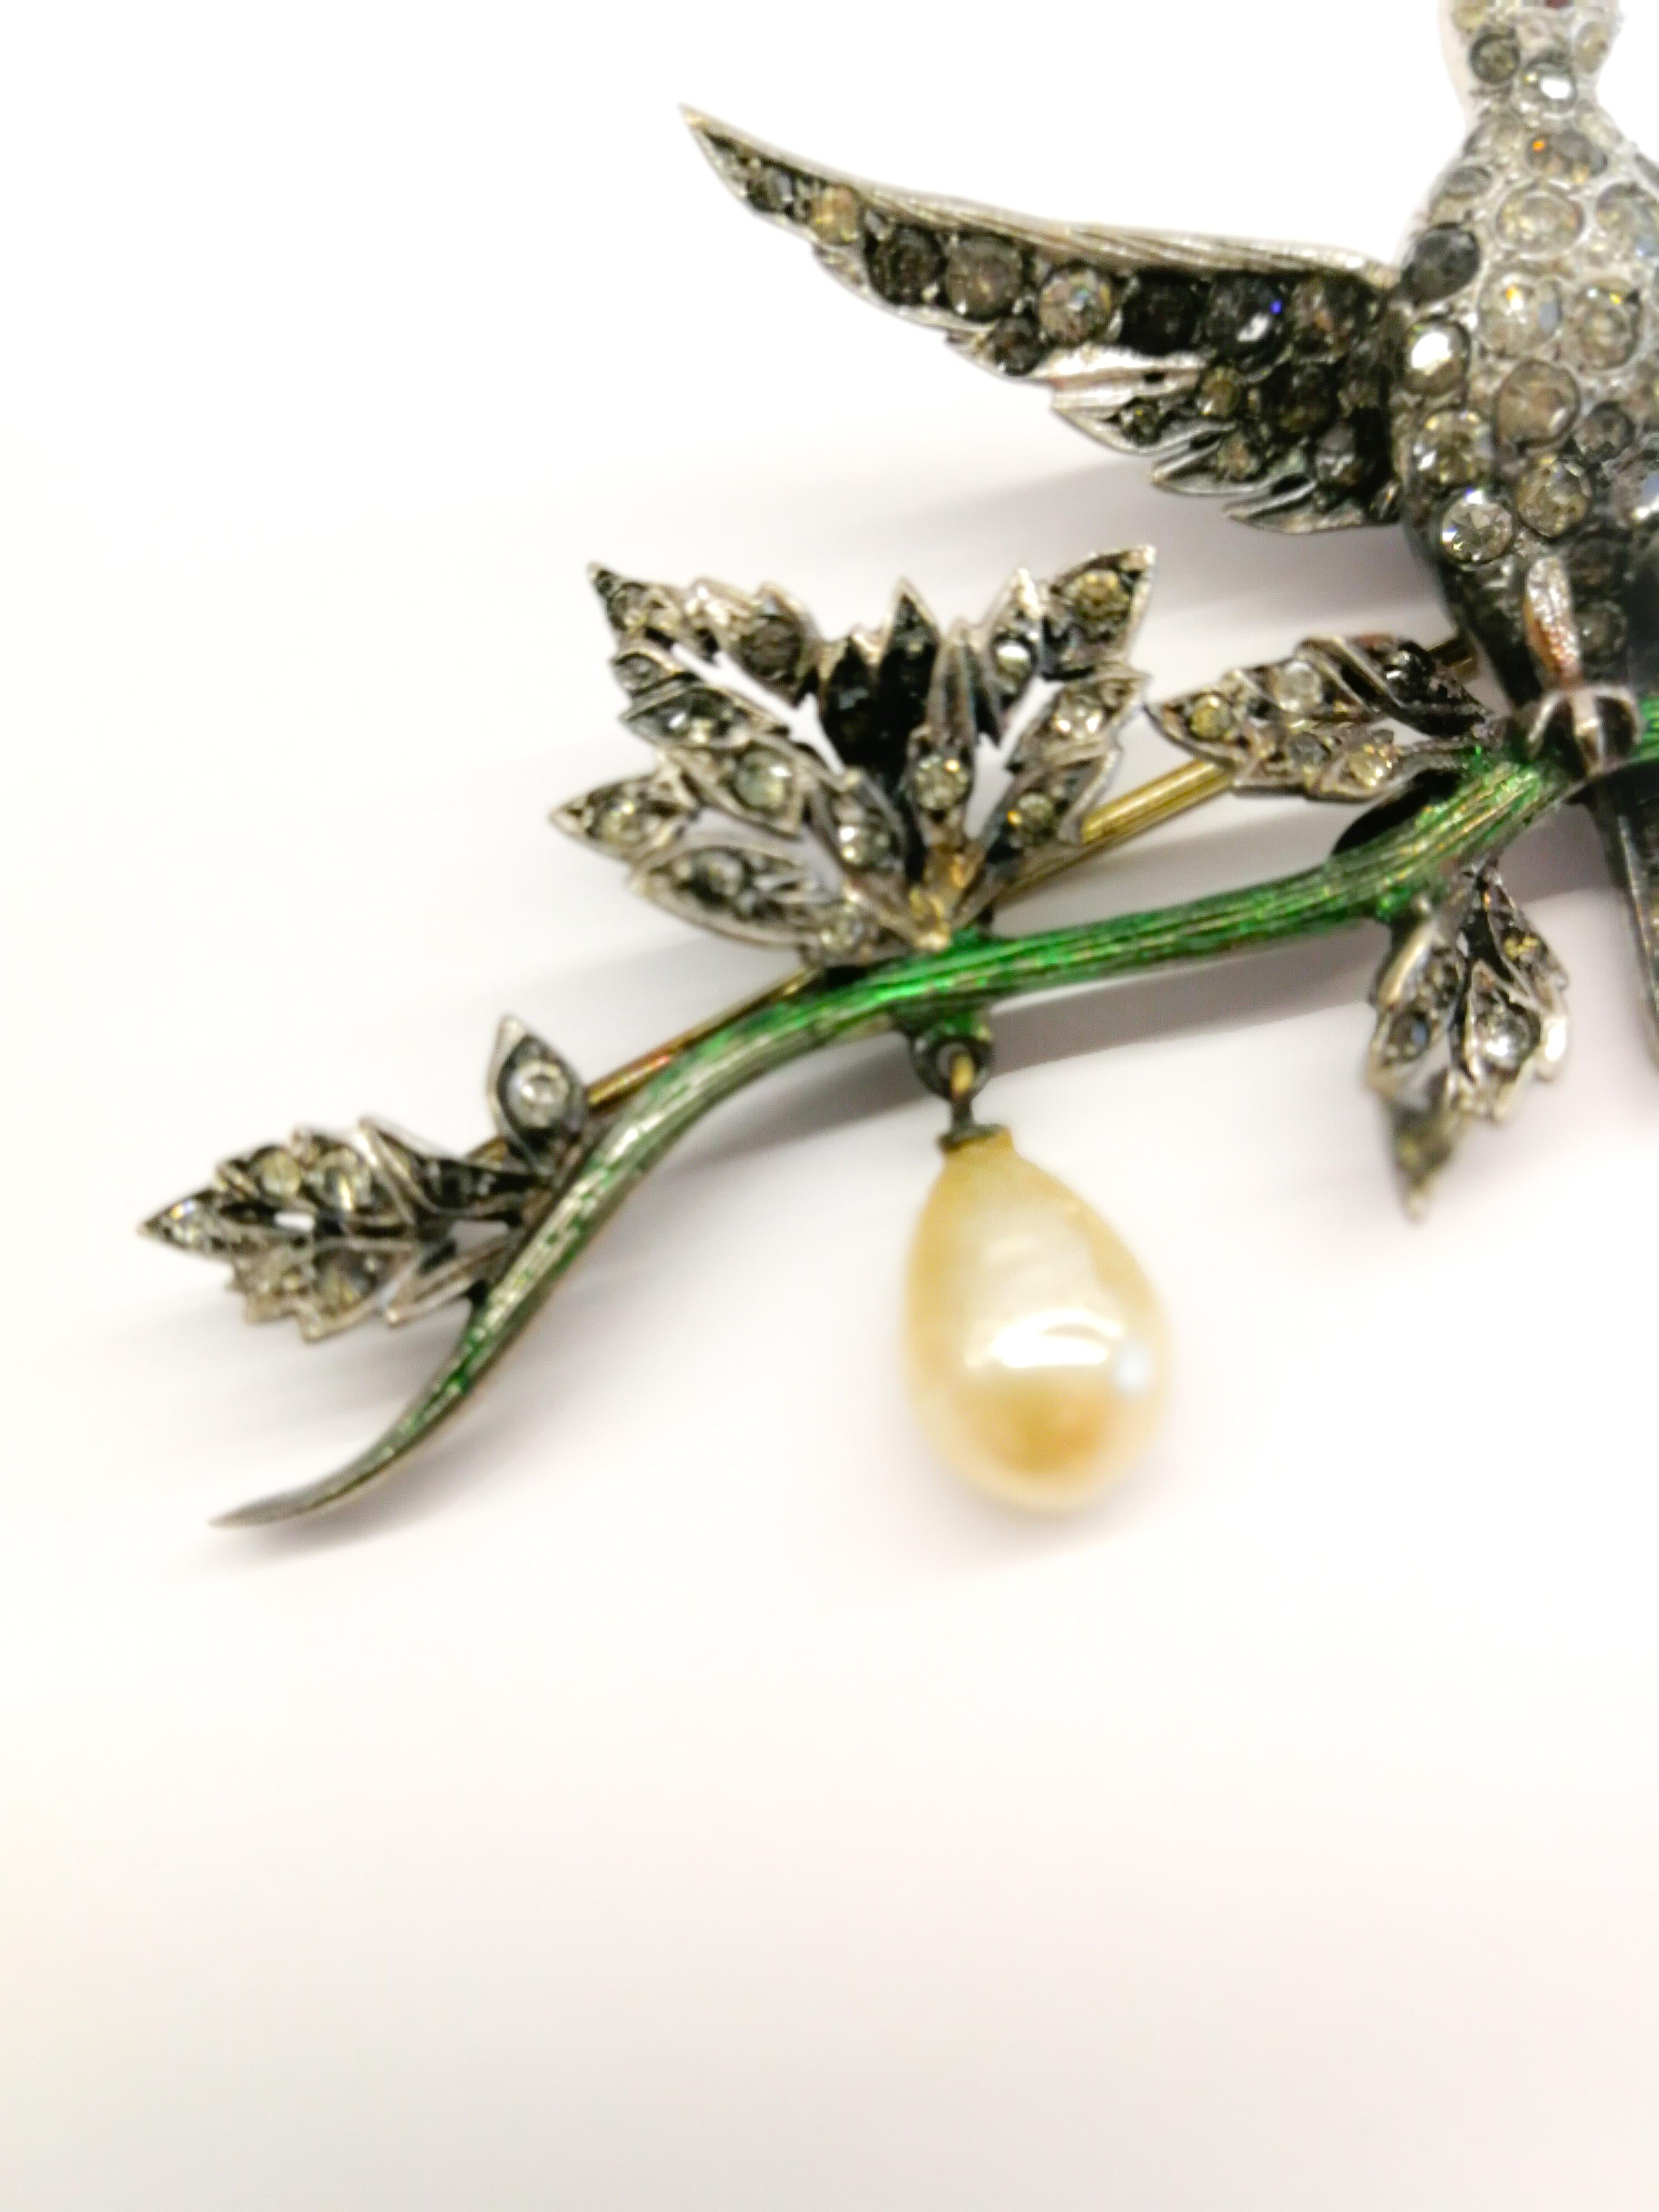 A very rare and exquisite 'en tremblant' brooch, from Christian Dior. Of excellent workmanship, the brooch is made of enamelled sterling silver, with clear and coloured pastes, and glass baroque pearl drops, the bird's wings gently 'trembling' with